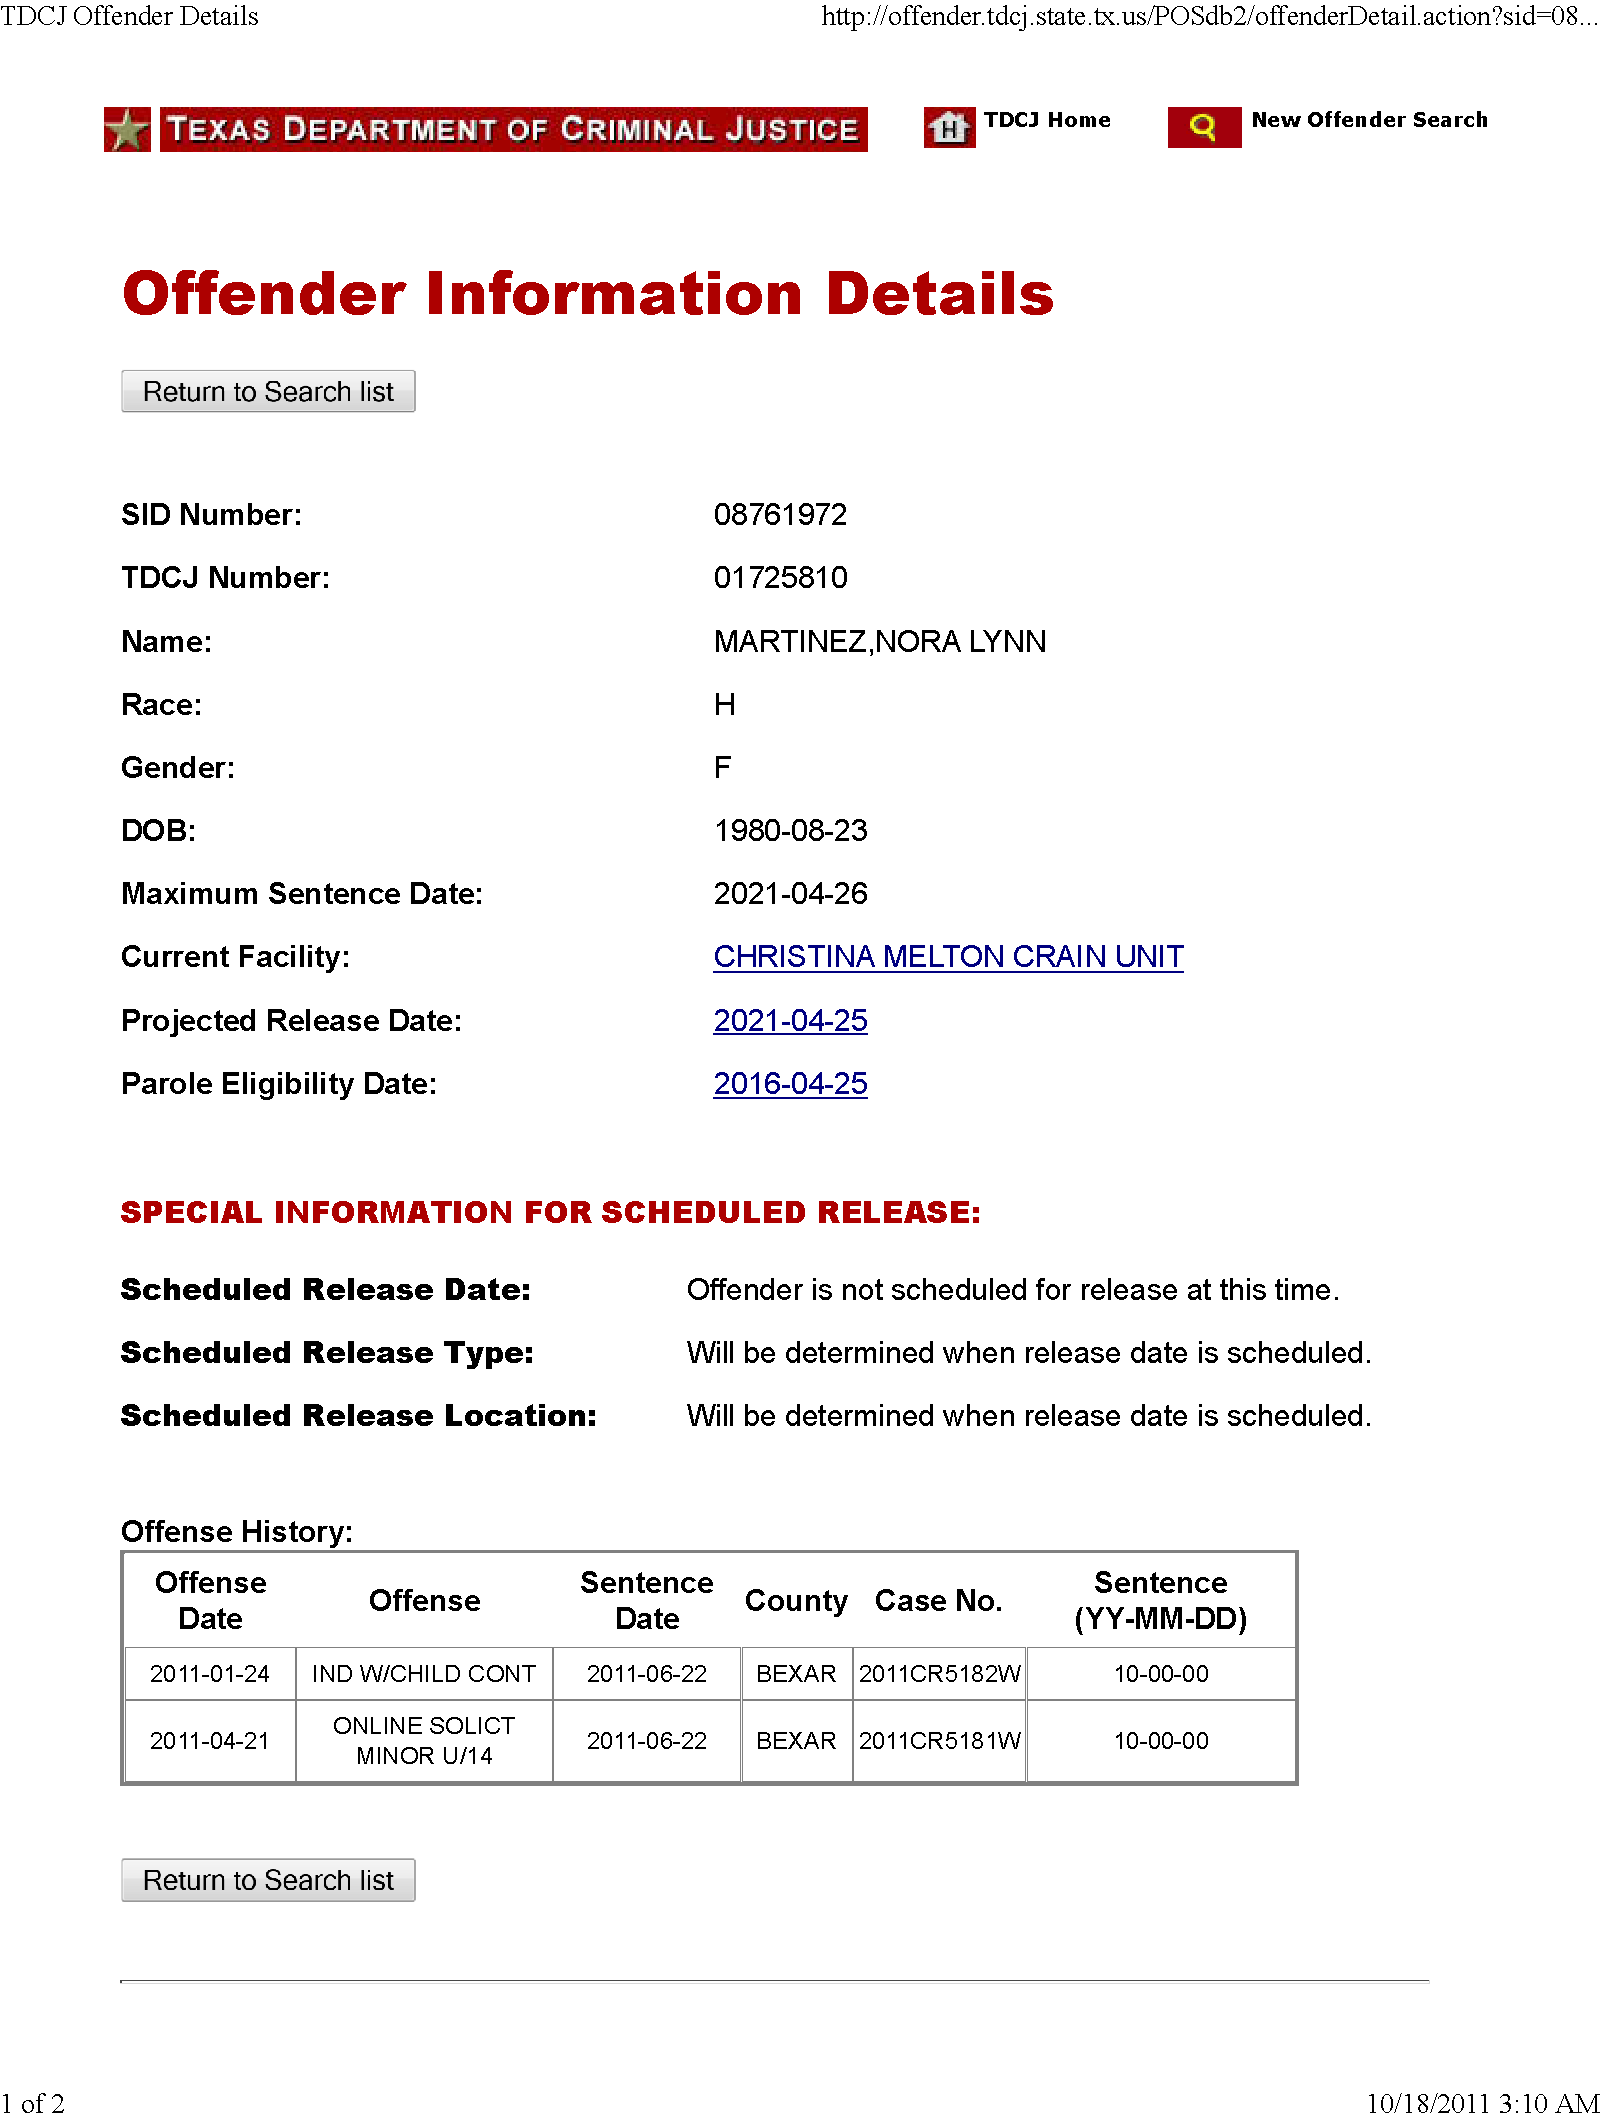 Copy of martinez nora tx offender locator1.png